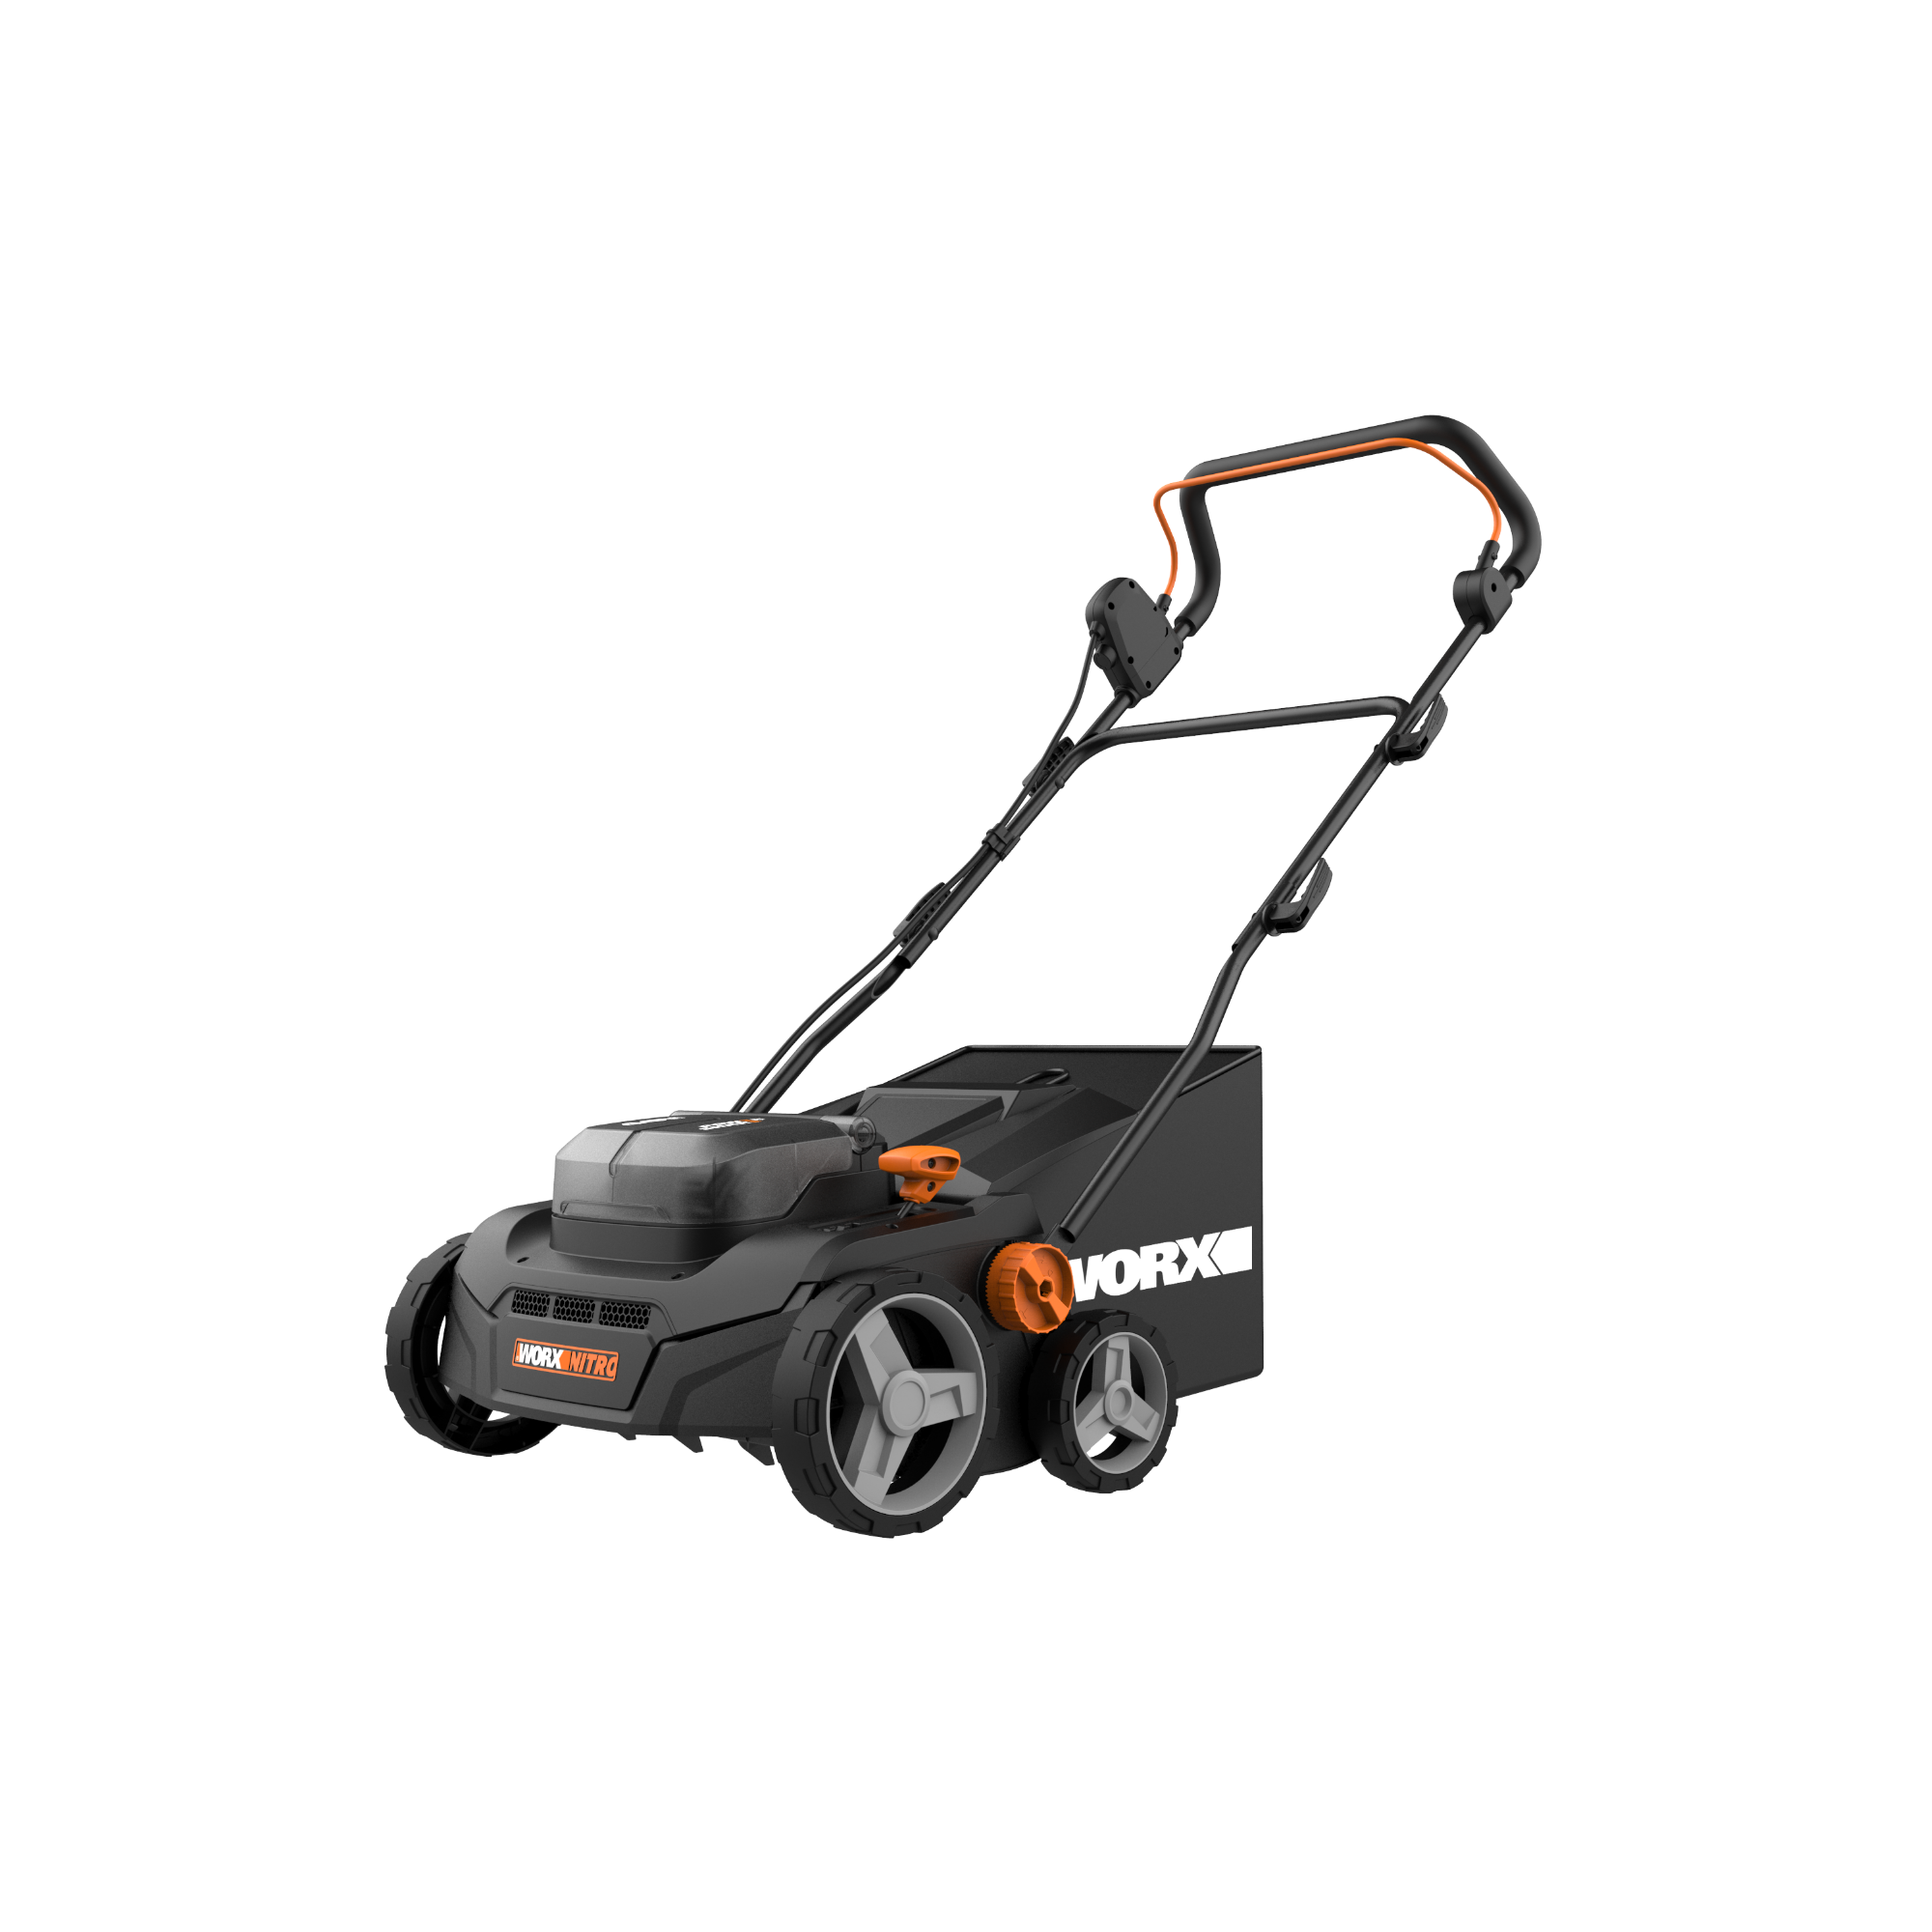 New WORX Nitro 40V 2-in-1 14 Inch Dethatcher Manages Lawn Care in Spring and Fall